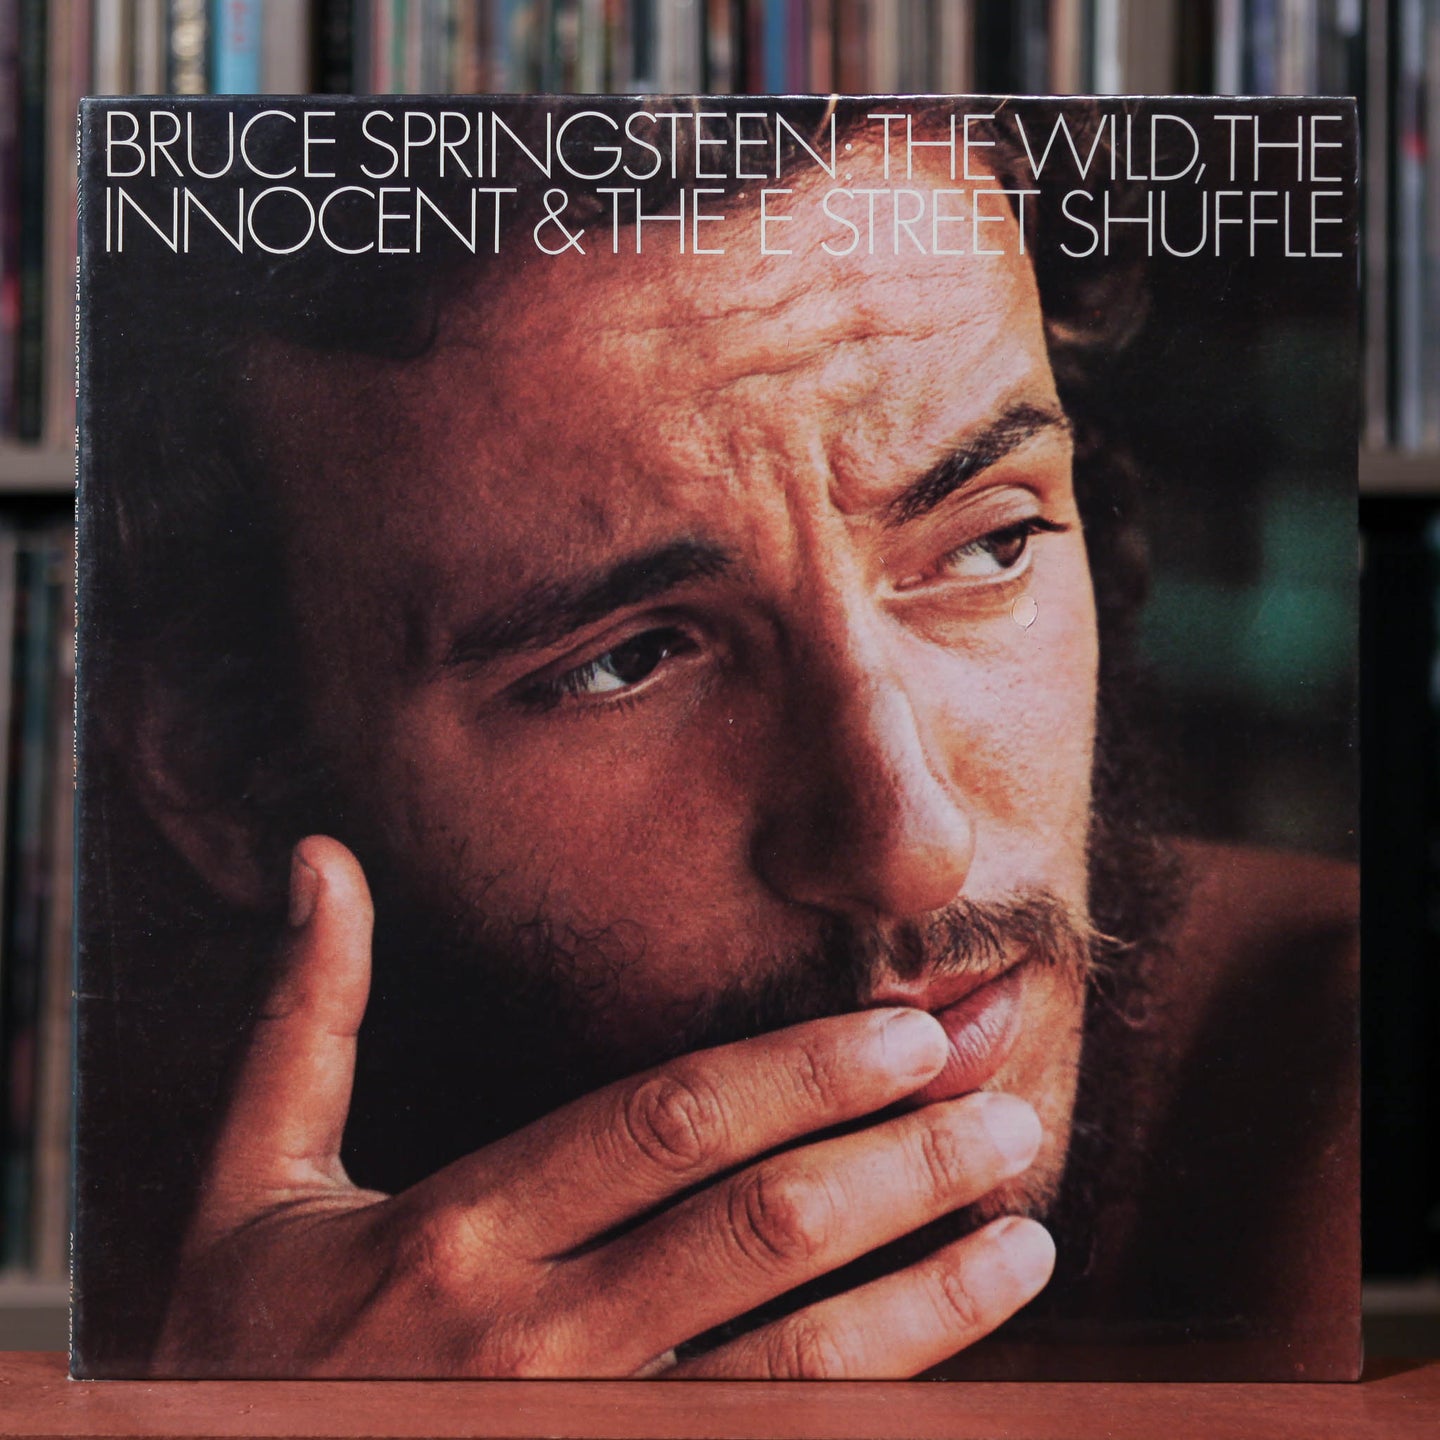 Bruce Springsteen - The Wild, The Innocent & The E Street Shuffle - 1980 Columbia, Sealed